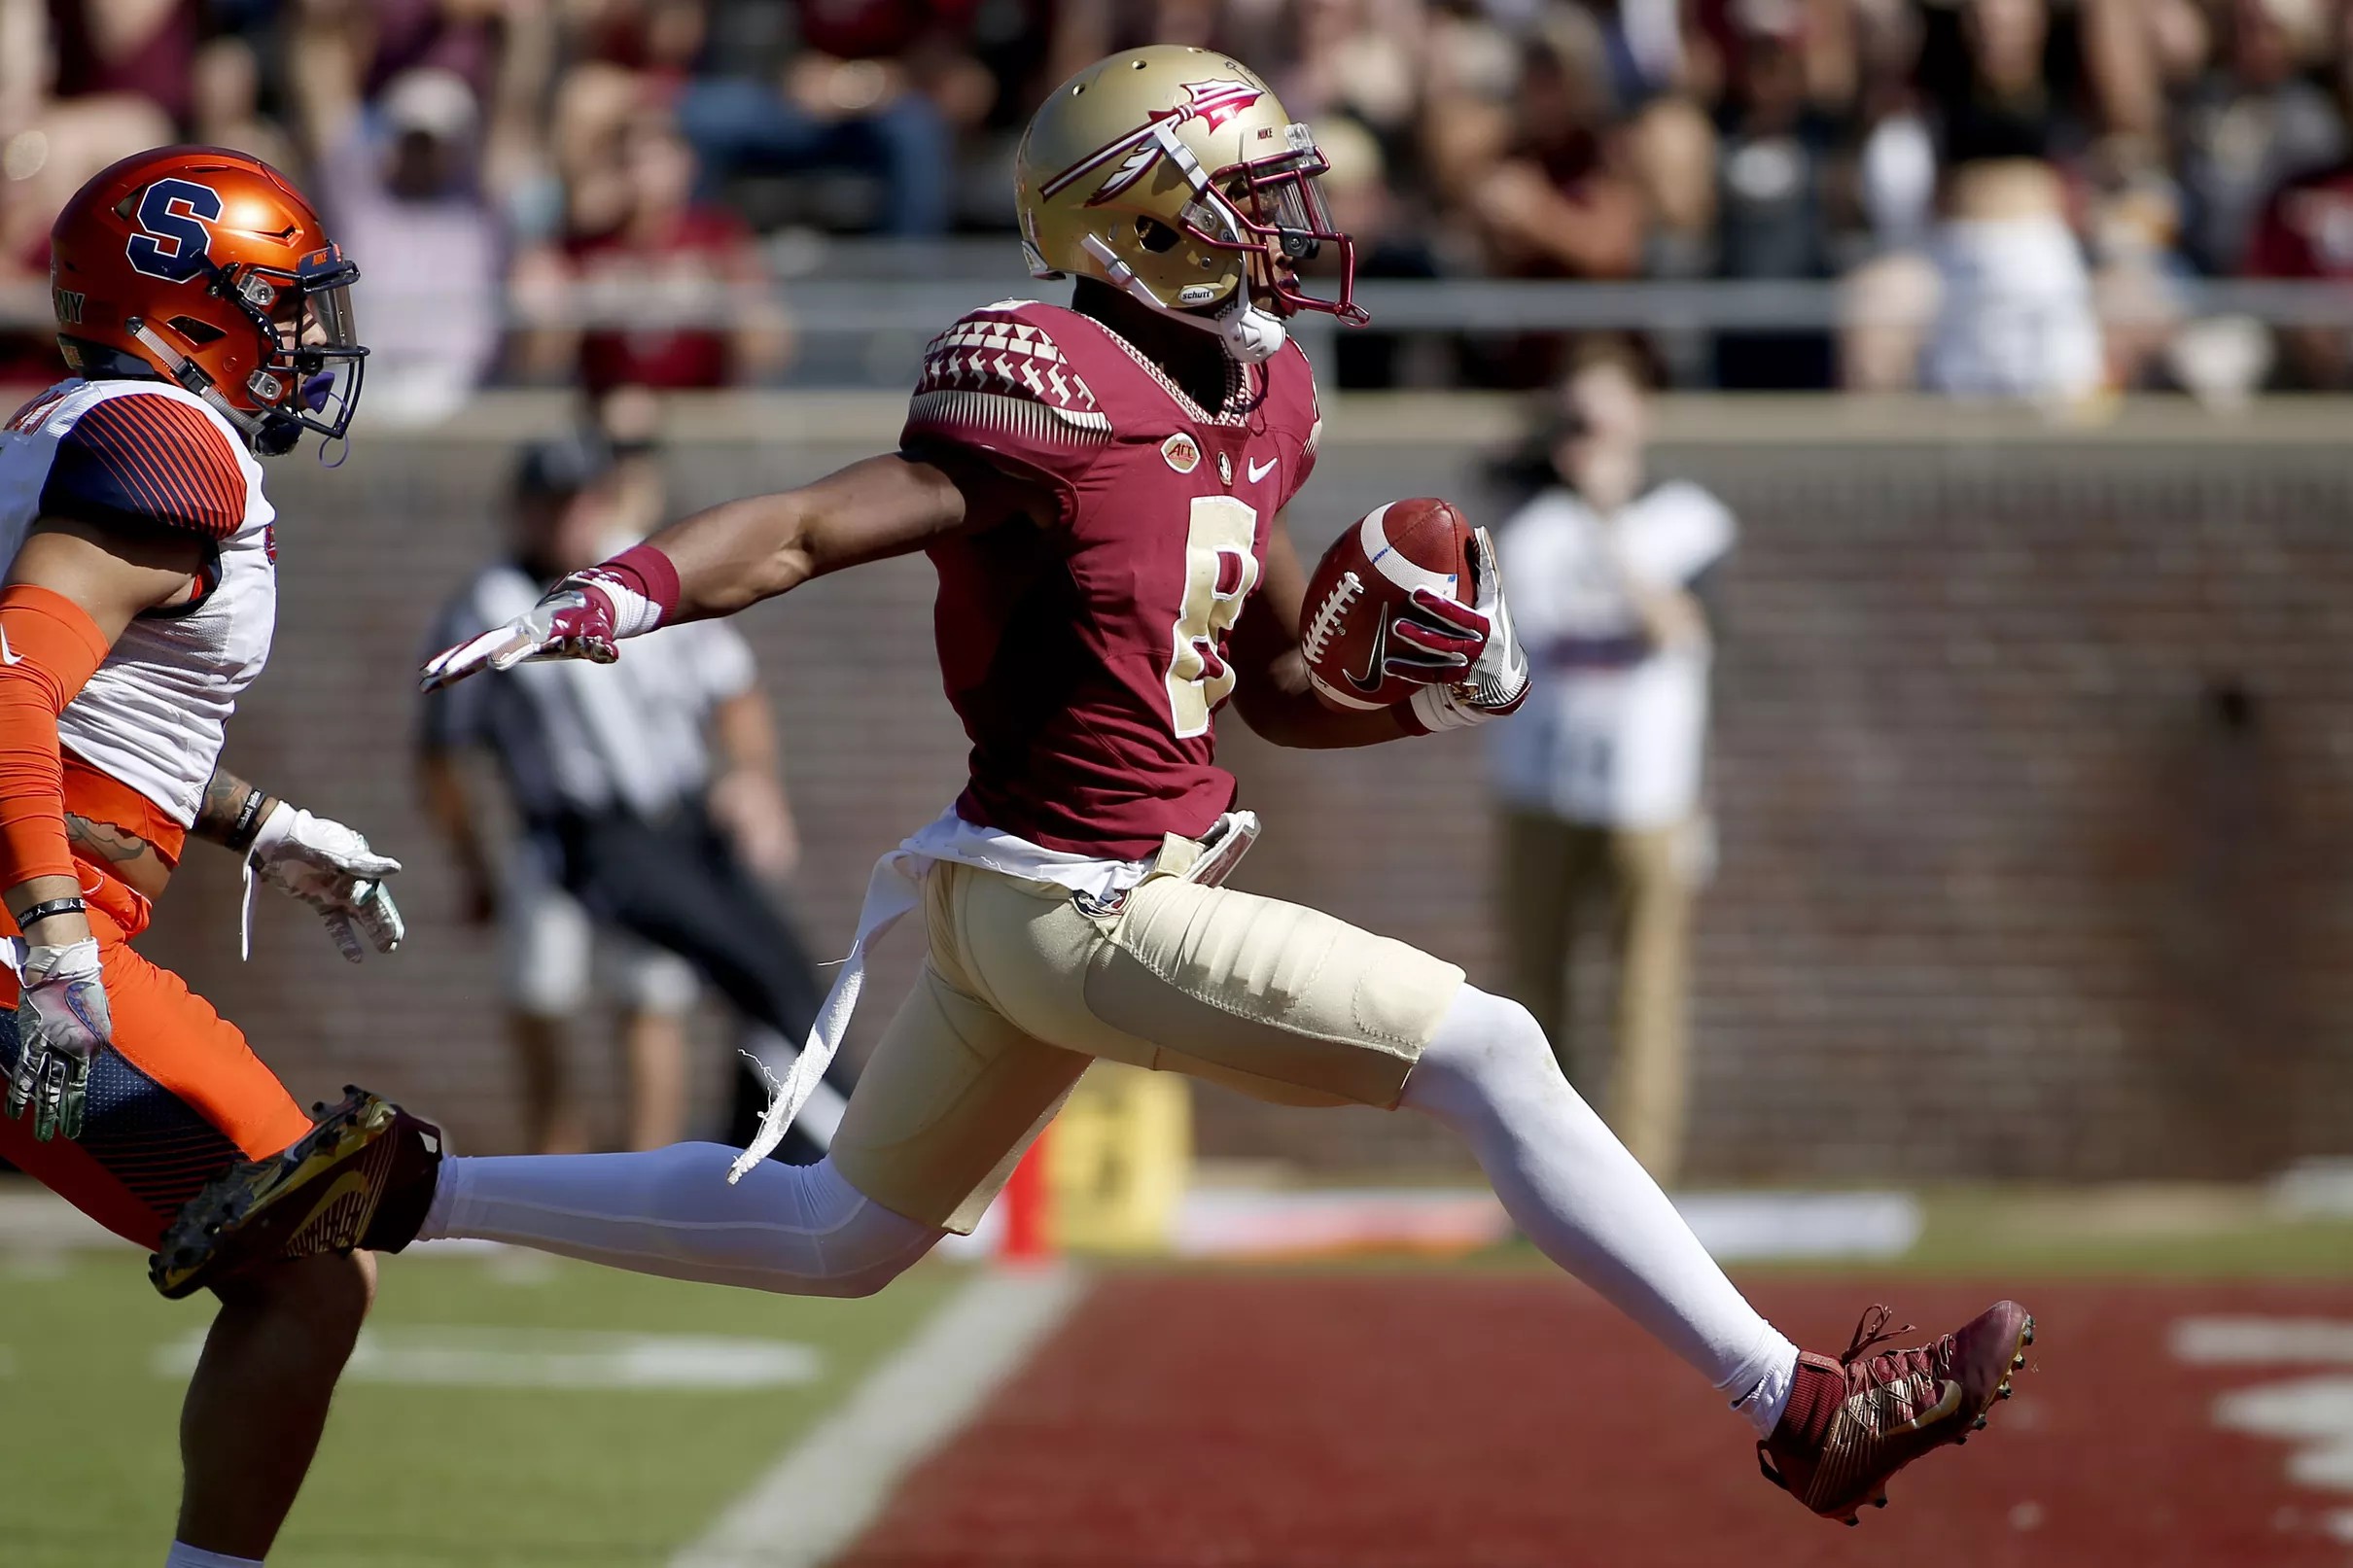 FSU’s redzone offense, worst among powerfive teams, must improve— and now